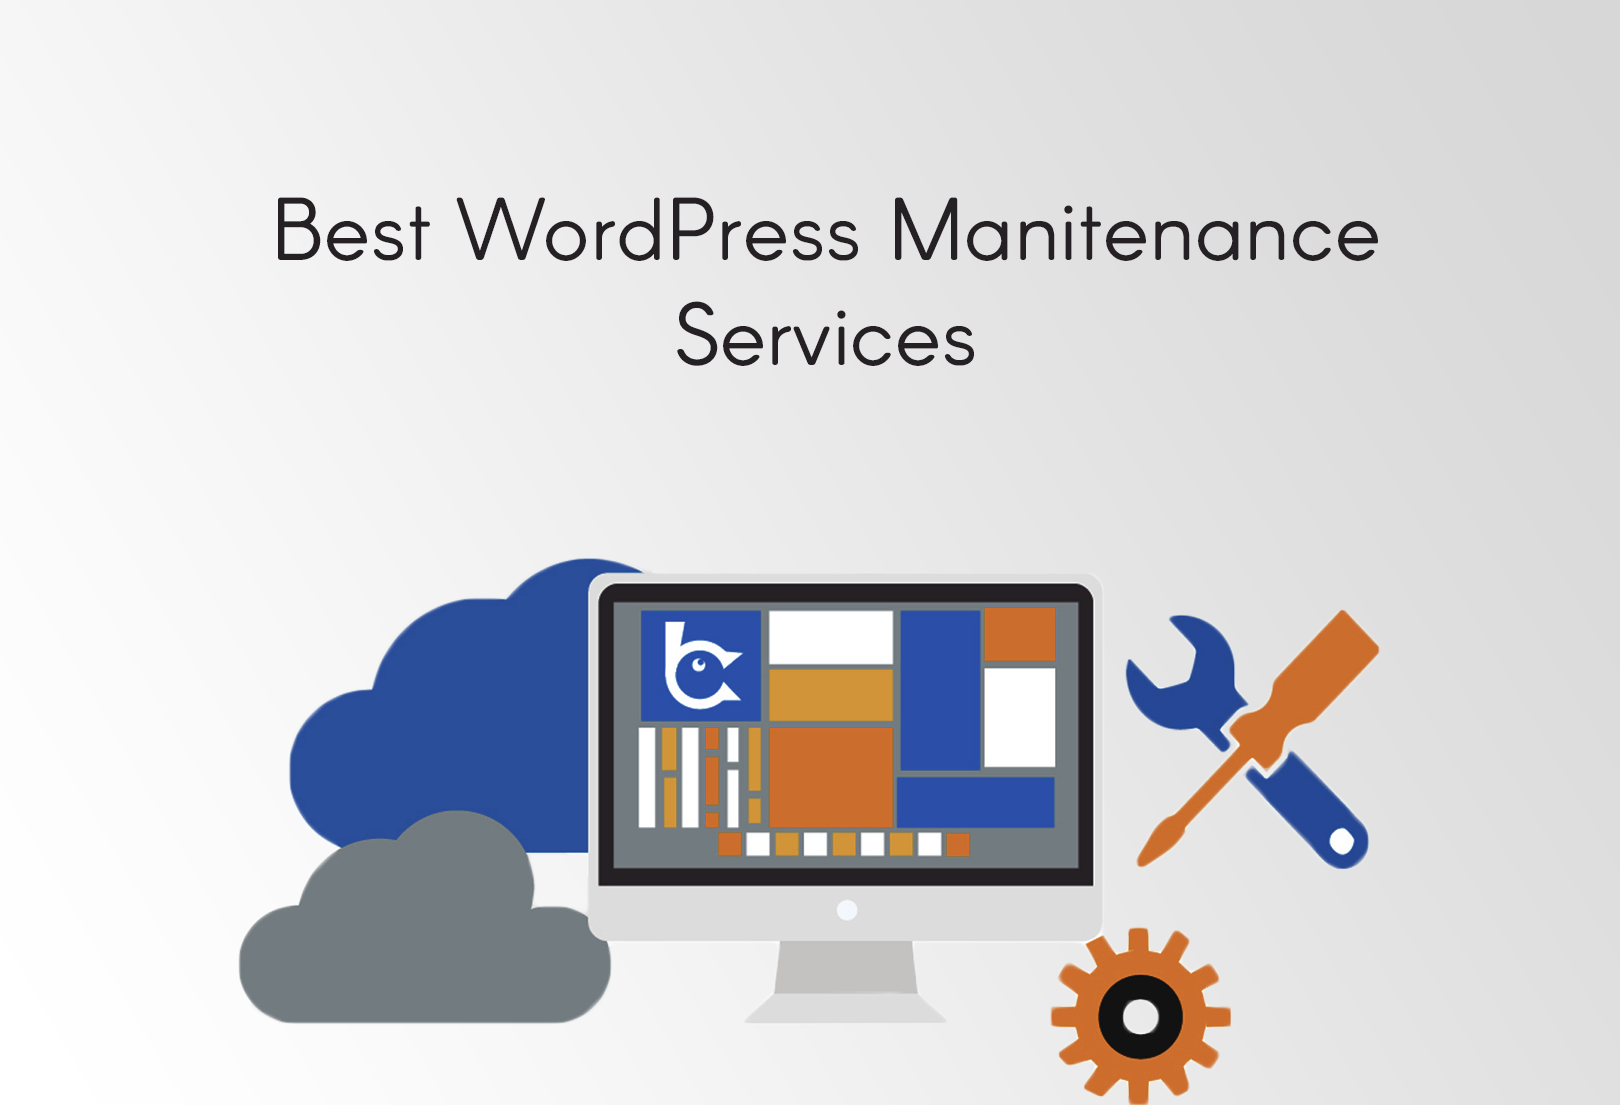 17 Best WordPress Maintenance and Support Services 2022